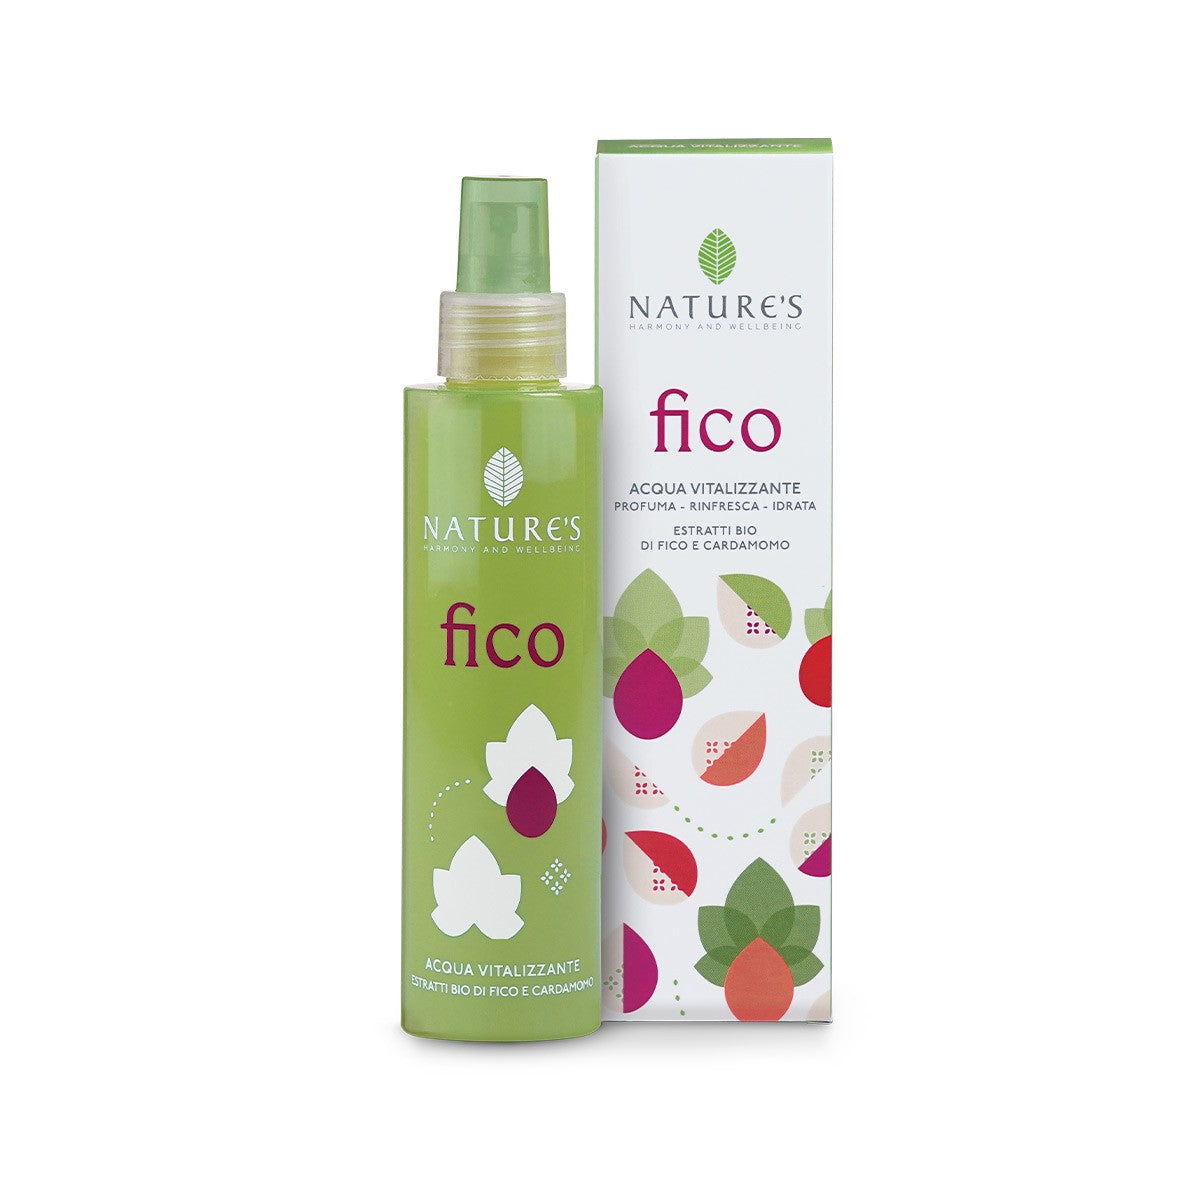 Nature's Fico No Alcohol Perfumed Vitalizing Water